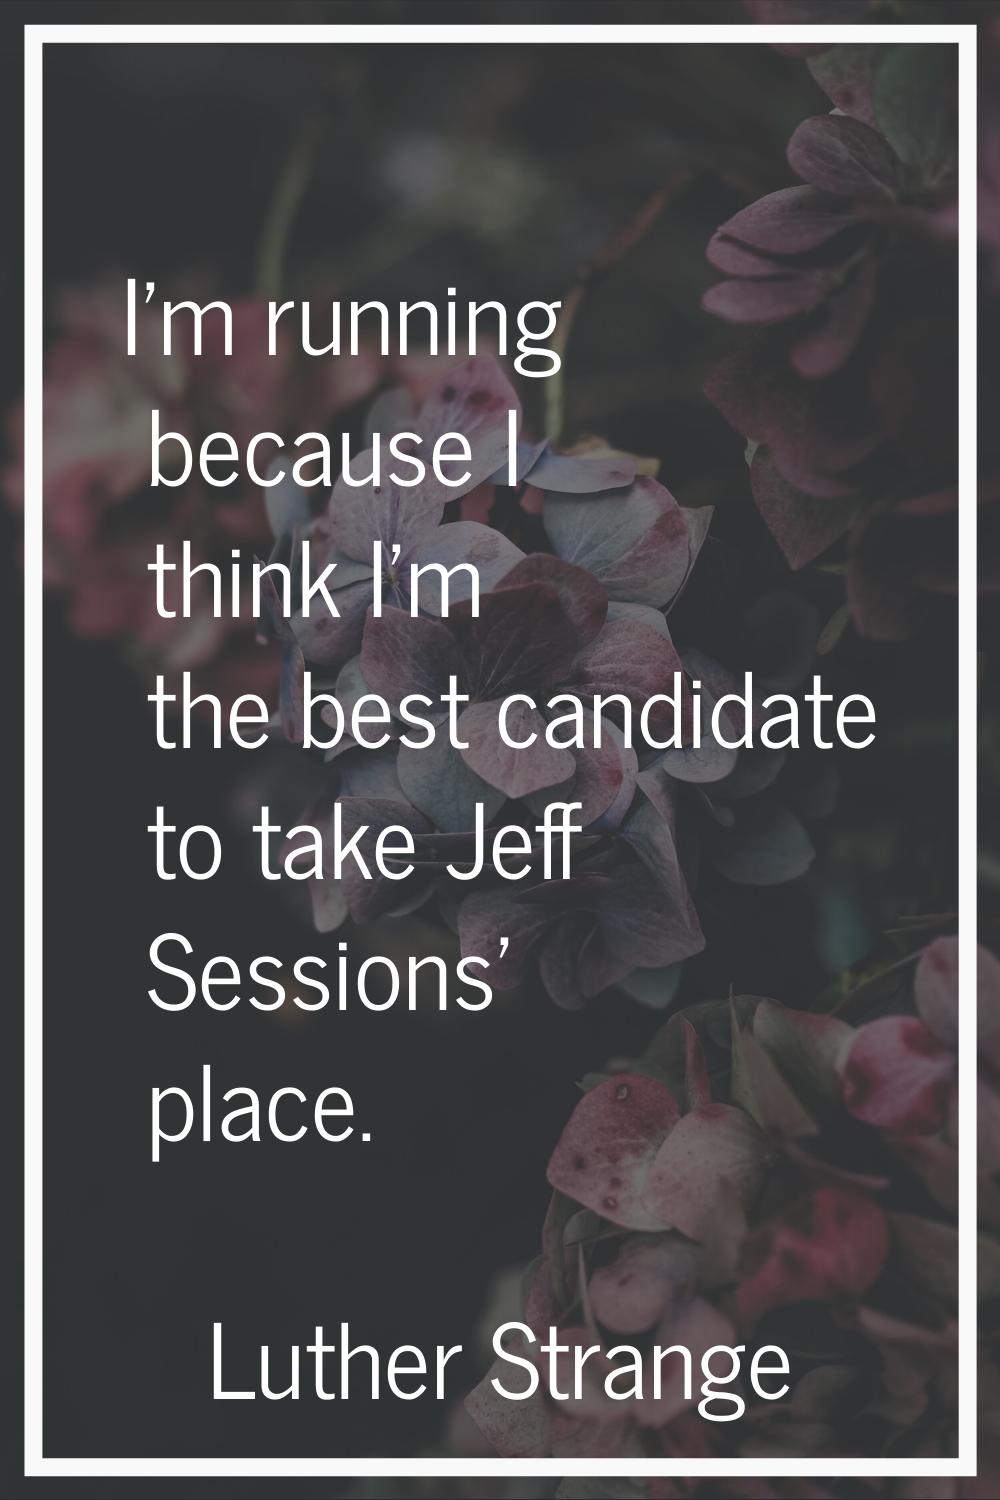 I'm running because I think I'm the best candidate to take Jeff Sessions' place.